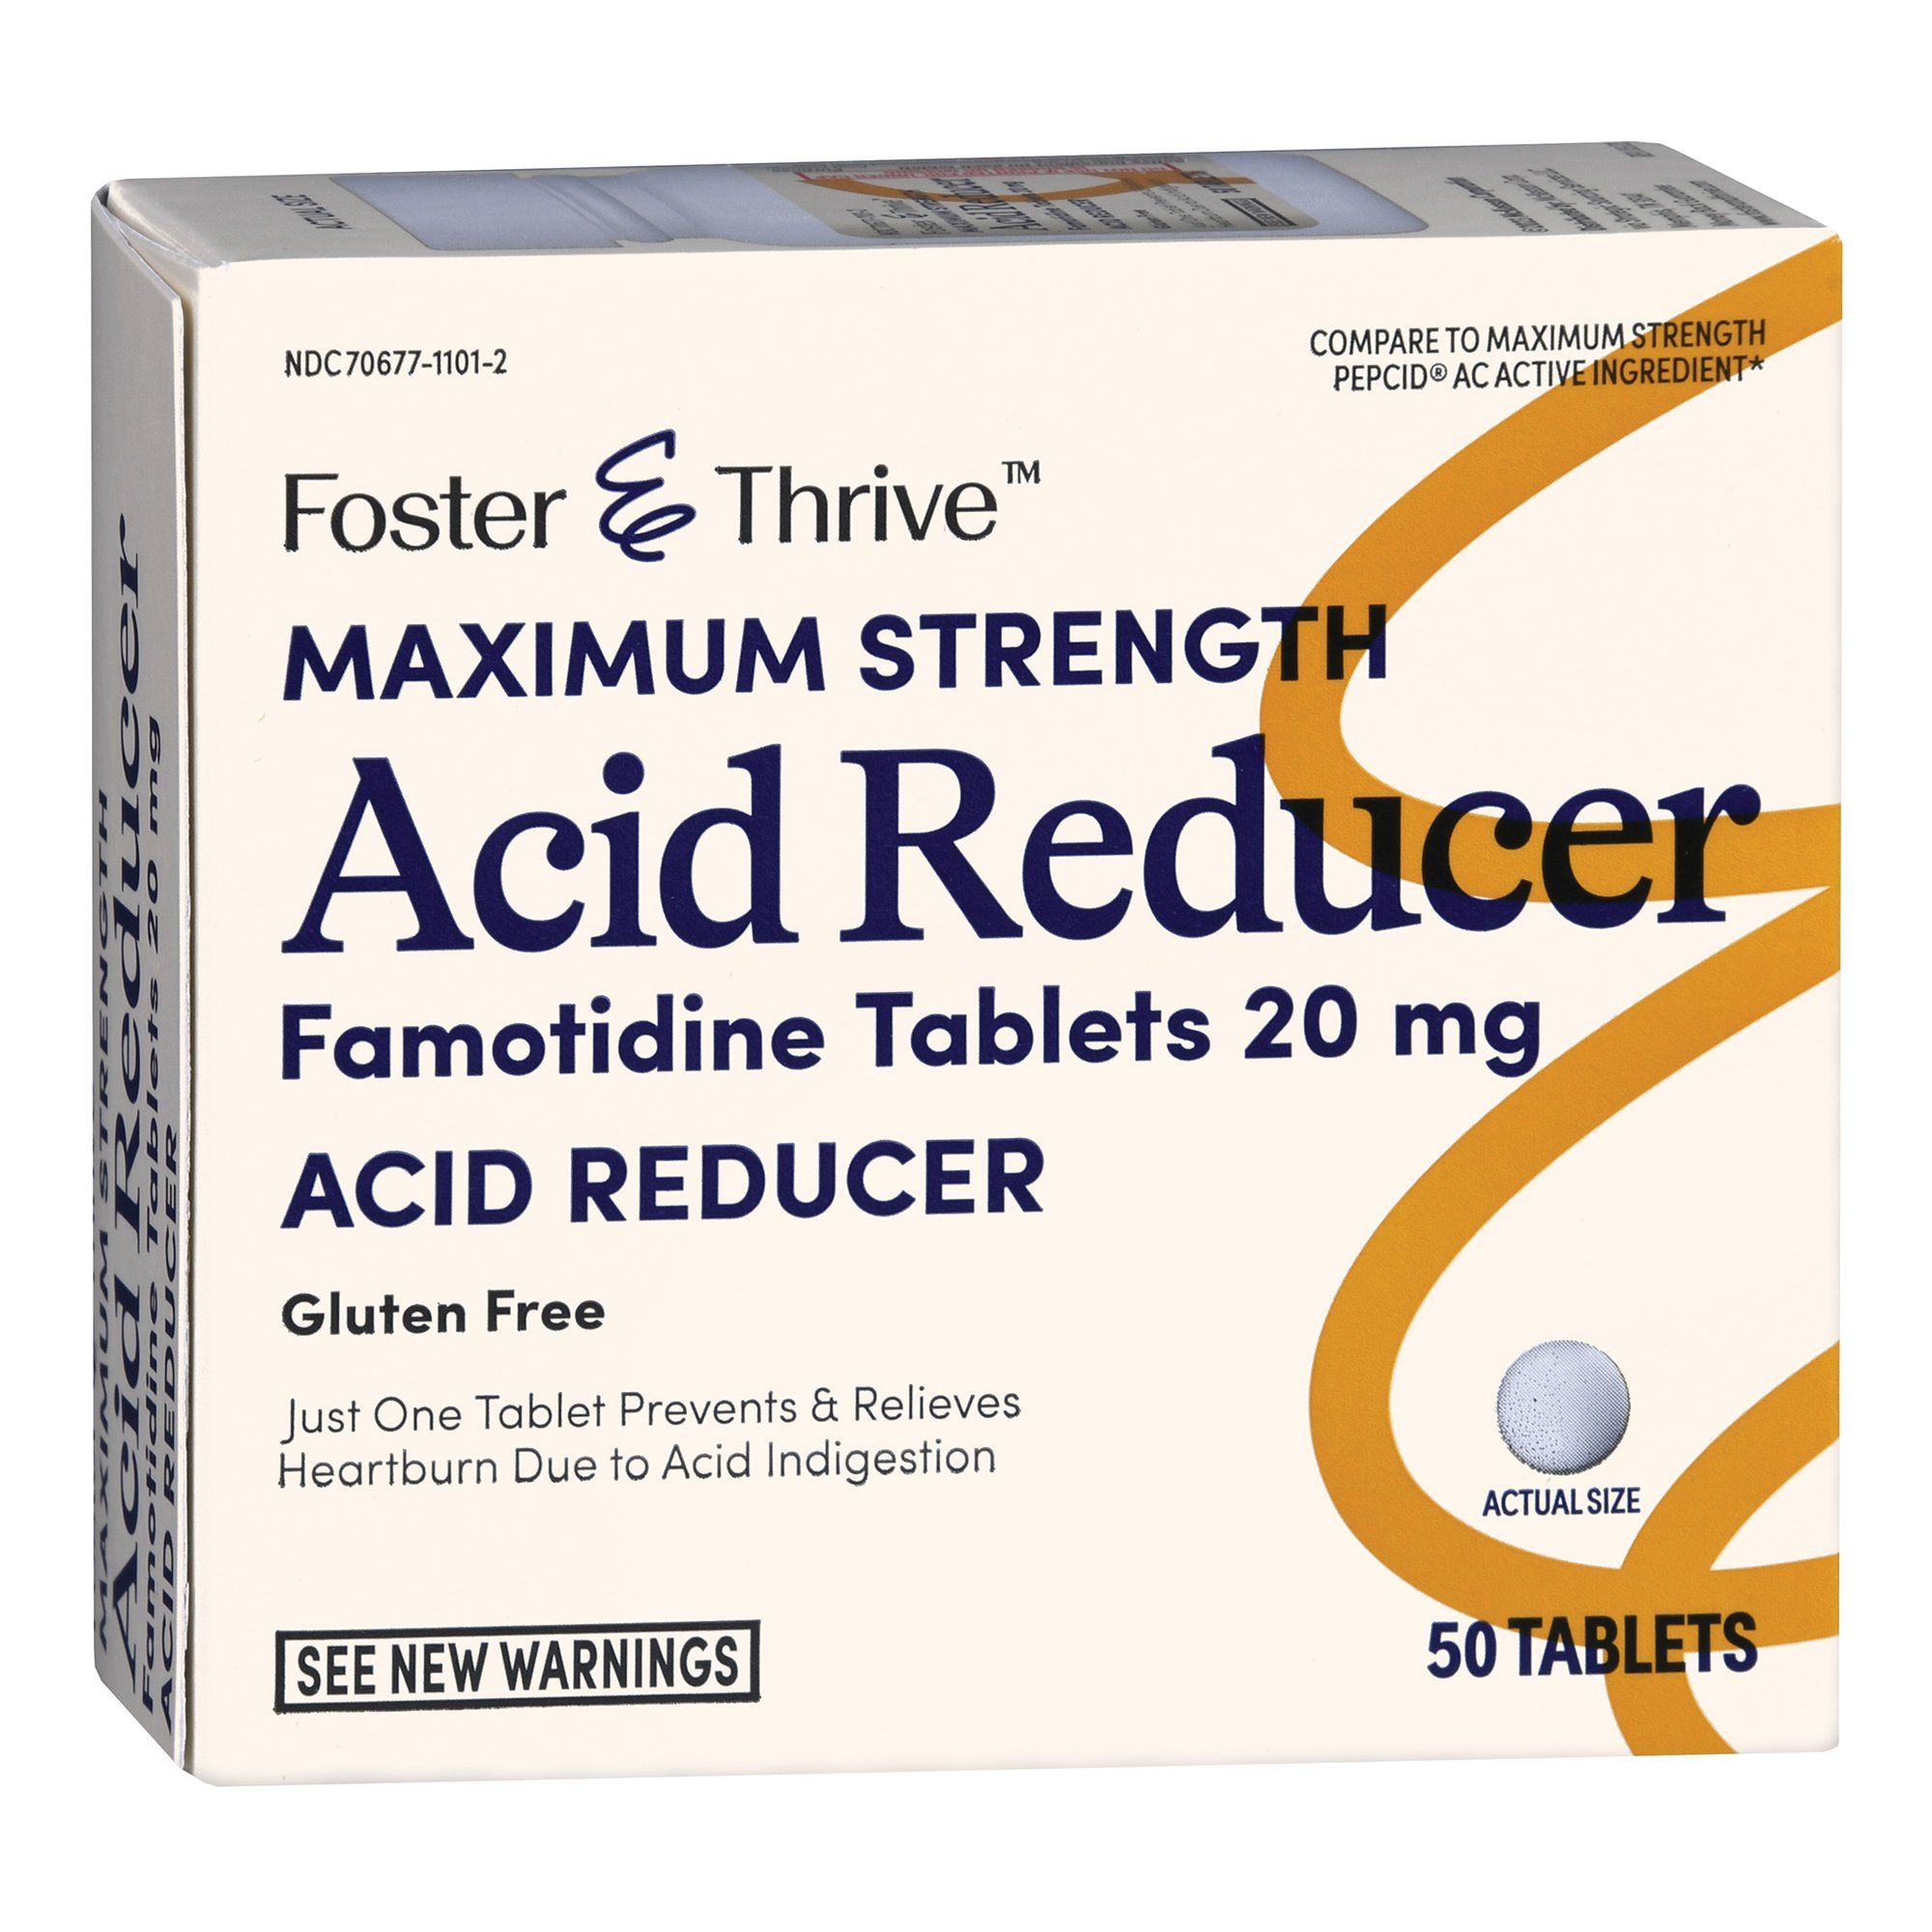 Foster & Thrive Maximum Strength Acid Reducer Famotidine Tablets, 20 mg - 50 ct